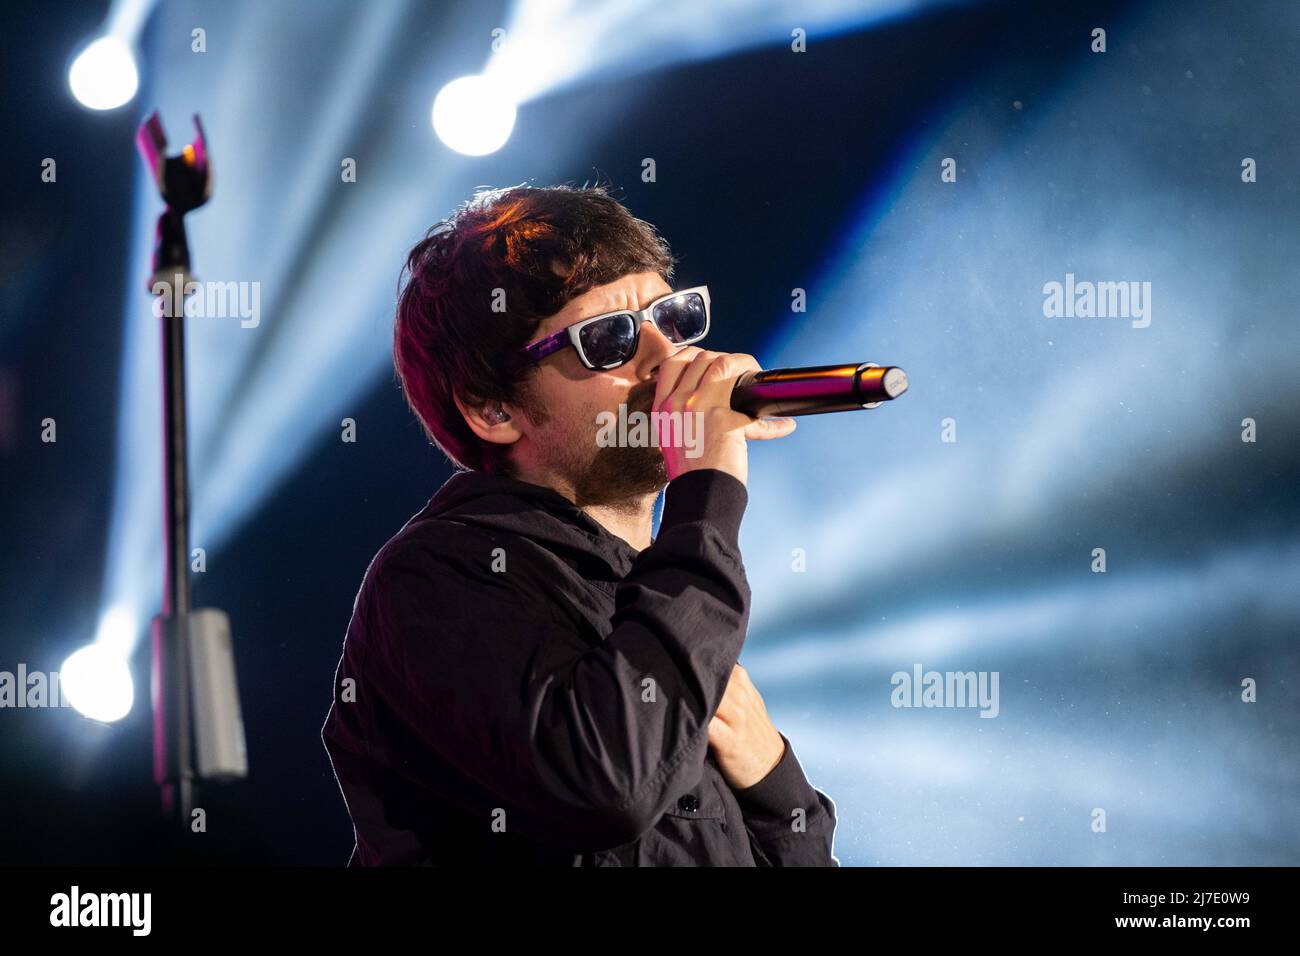 Mantua, Italy. 08 May, 2022. Picture shows Gazzelle Italian singer during the performs at Grana Padano Arena Credit: Roberto Tommasini/Alamy Live News Stock Photo